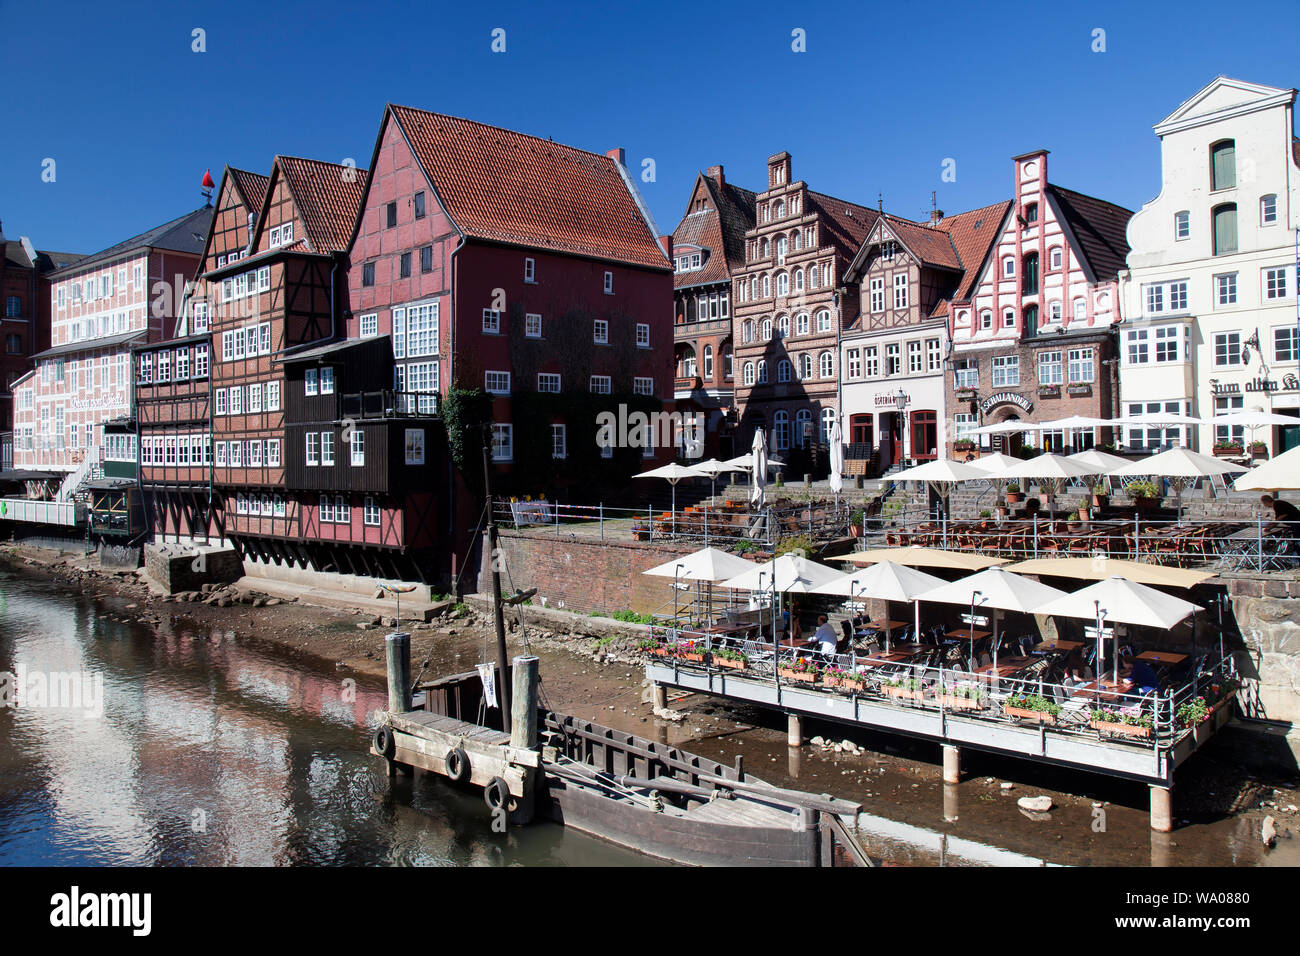 Half-timbered houses in the old town of Lüneburg on the Ilmenau, Lueneburg, Germany, 30057084 *** Local Caption *** Stock Photo